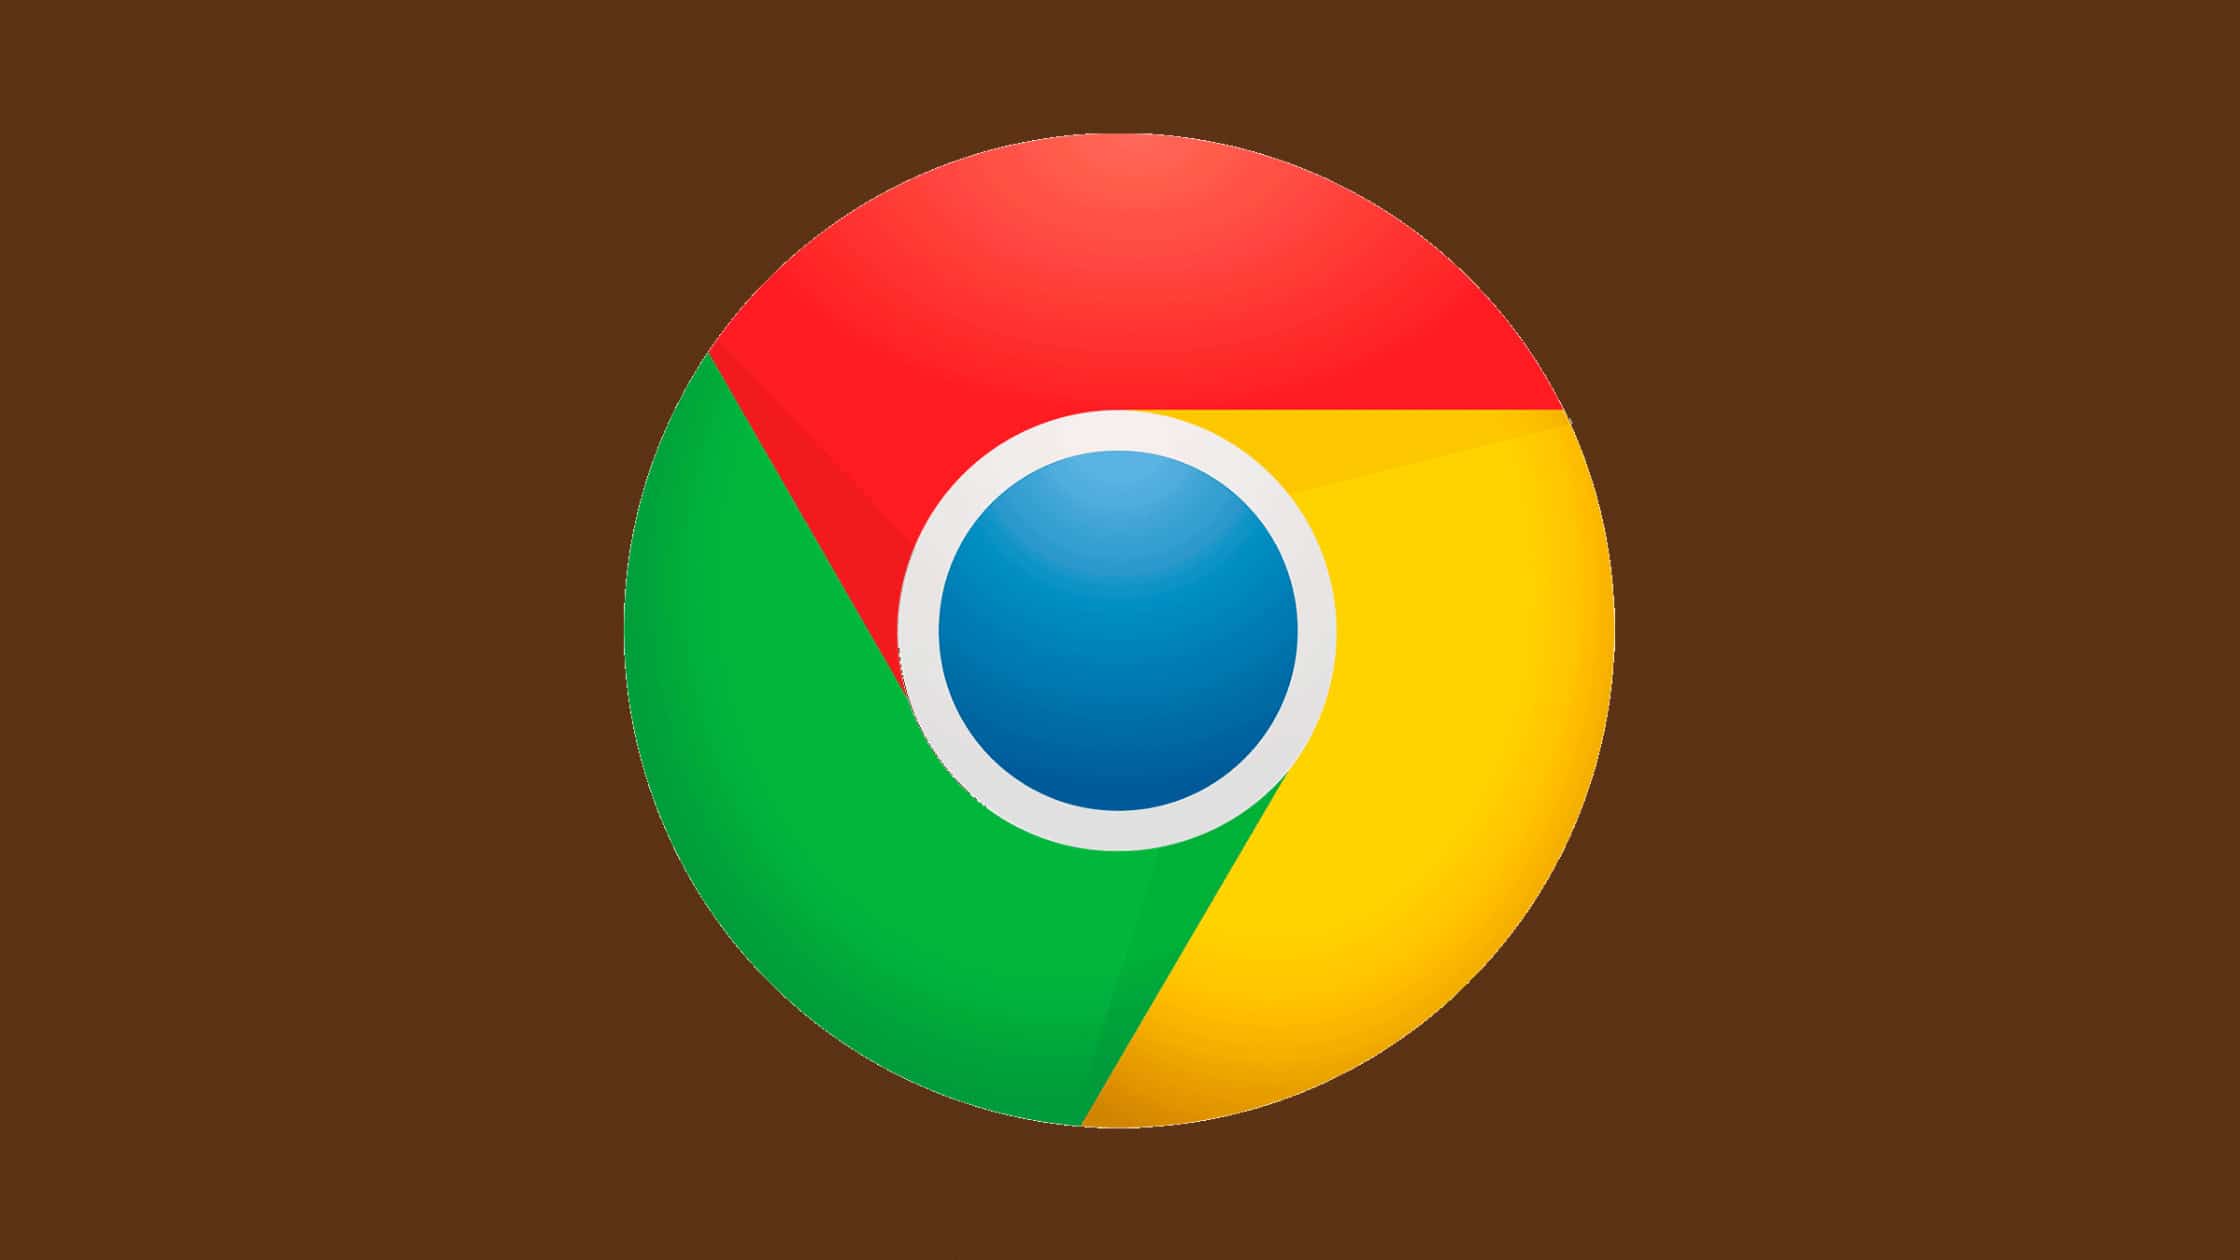 14 New 0 Day Vulnerabilities In Chrome Os E2 80 93 Update Your Chrome Os Asap